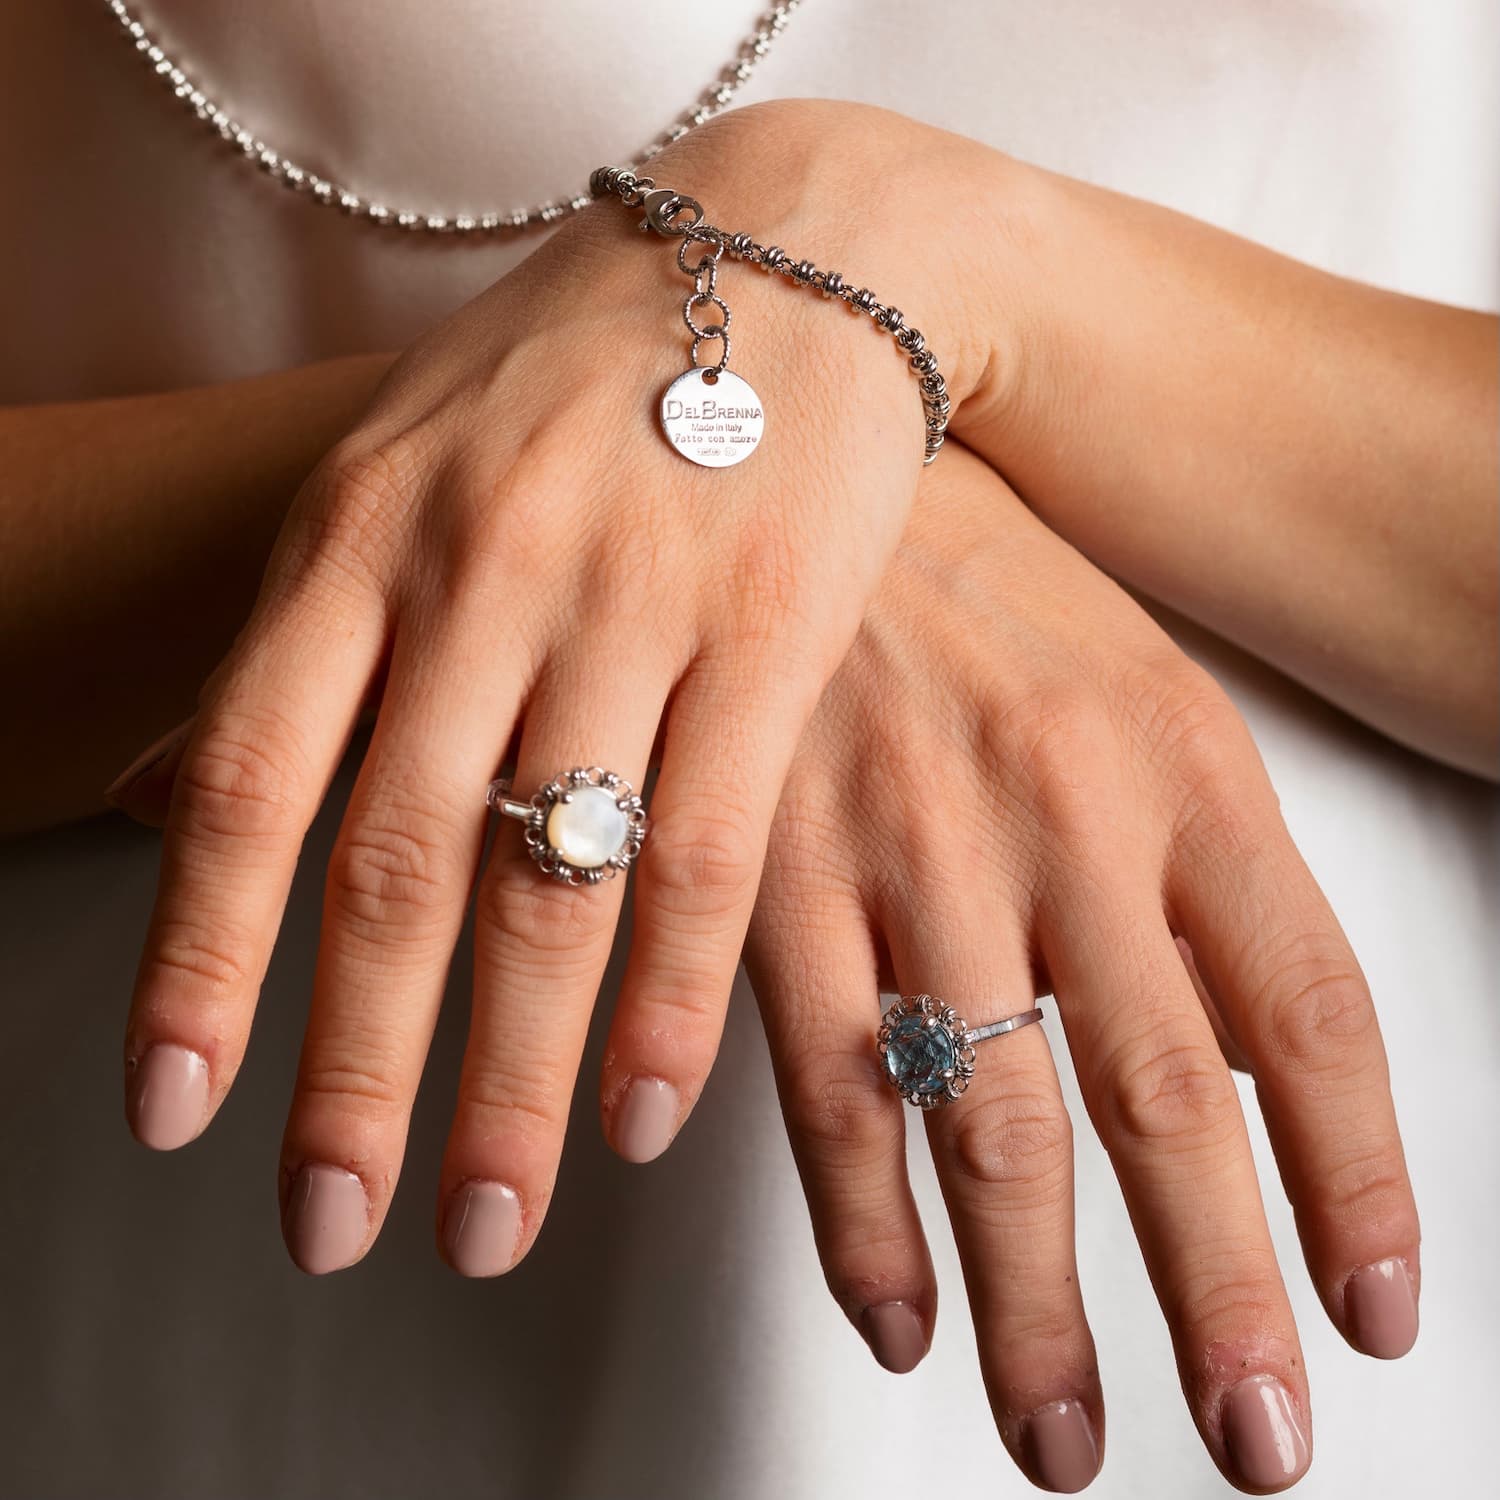 A closeup of a model’s hands crosses to show two silver rings with semi-precious gemstones set inside a silver chain design that matches the silver bracelet and the silver necklace. All jewelry is hand-crafted by DelBrenna Italian Jewelry designers in Tuscany. 